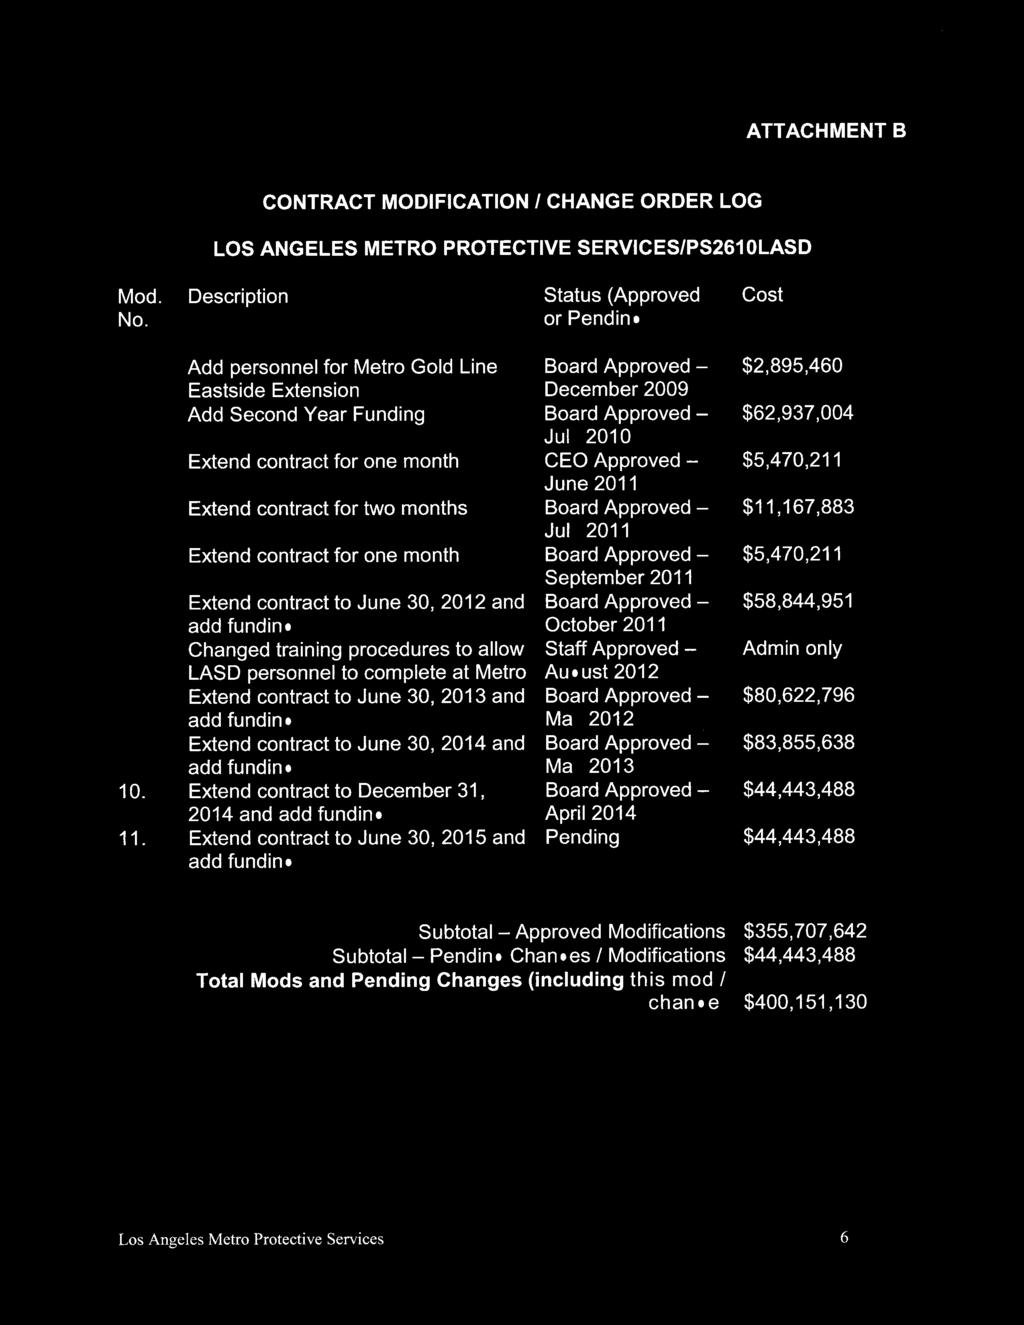 Extend contract for one month CEO Approved $5,470,211 June 2011 4. Extend contract for two months Board Approved $11,167,883 Jul 2011 5.